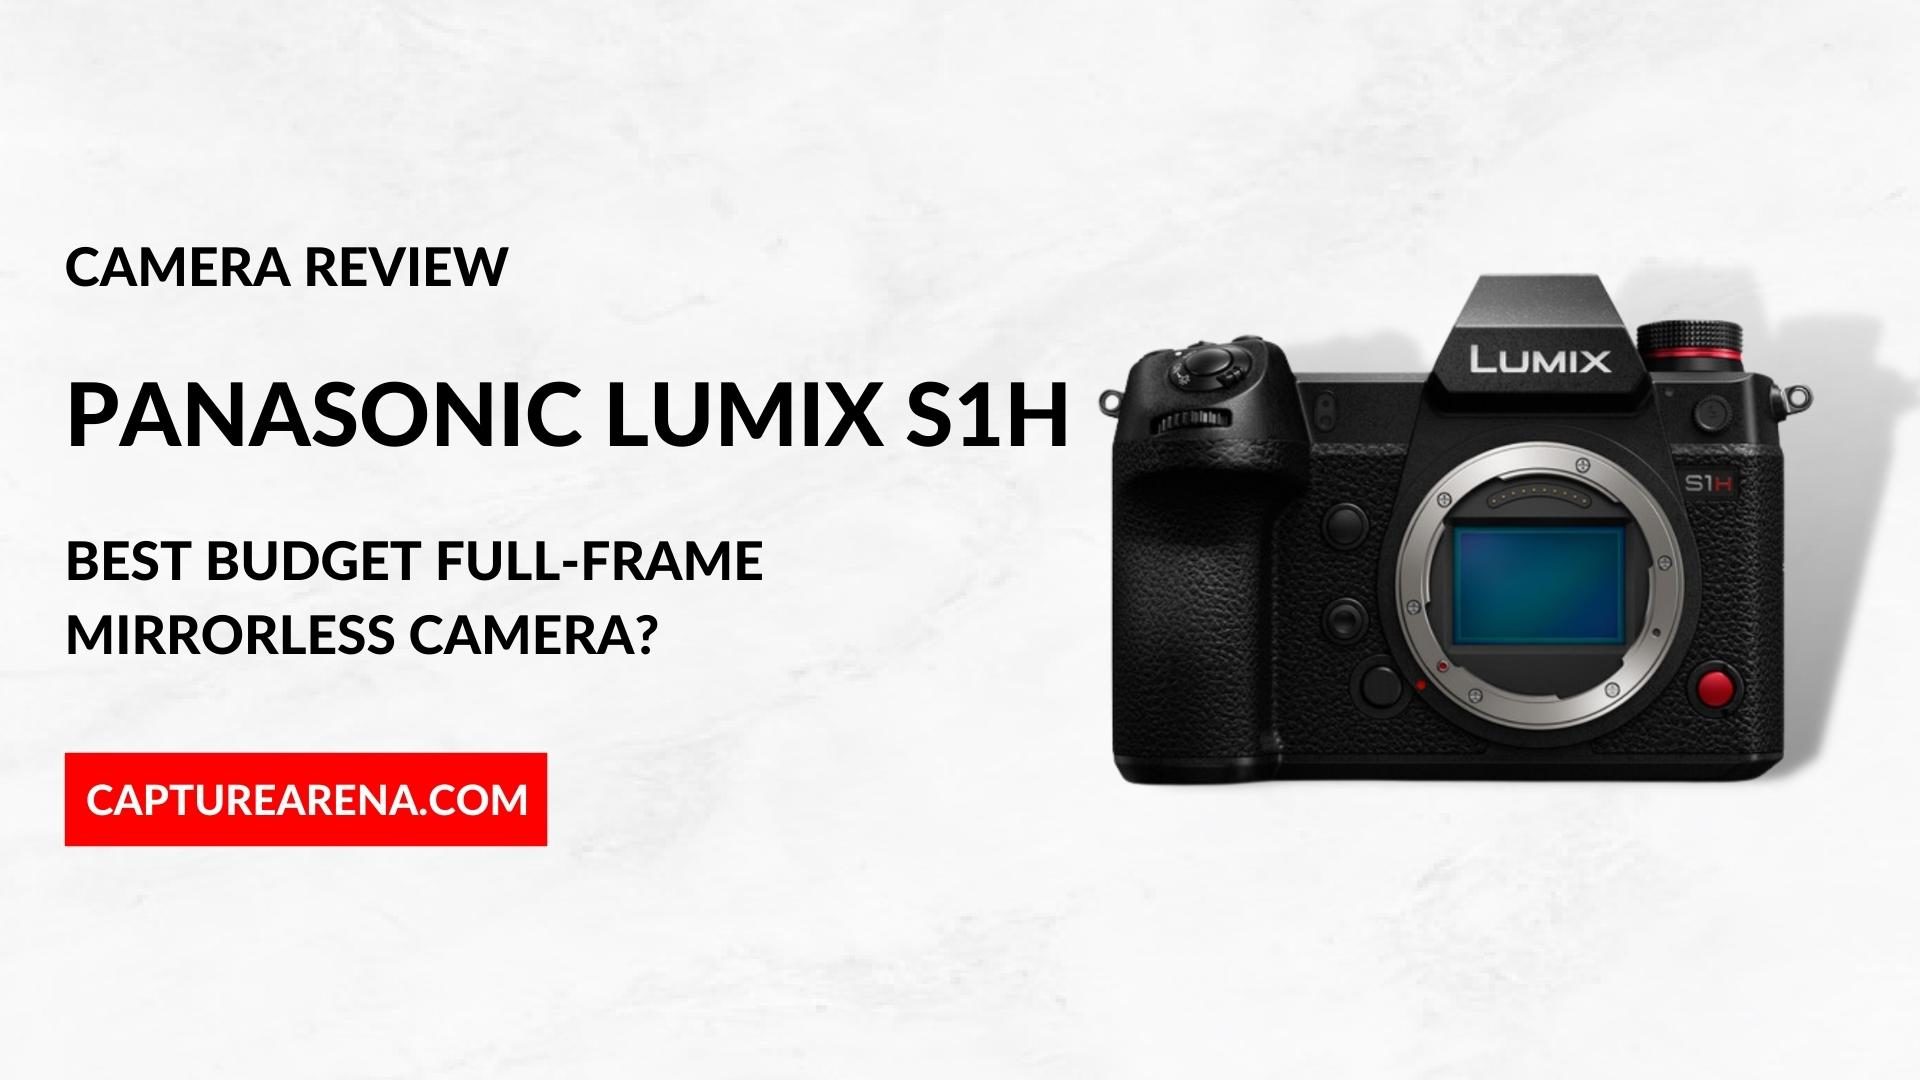 Panasonic Lumix S1H Review, Resources, and FAQs